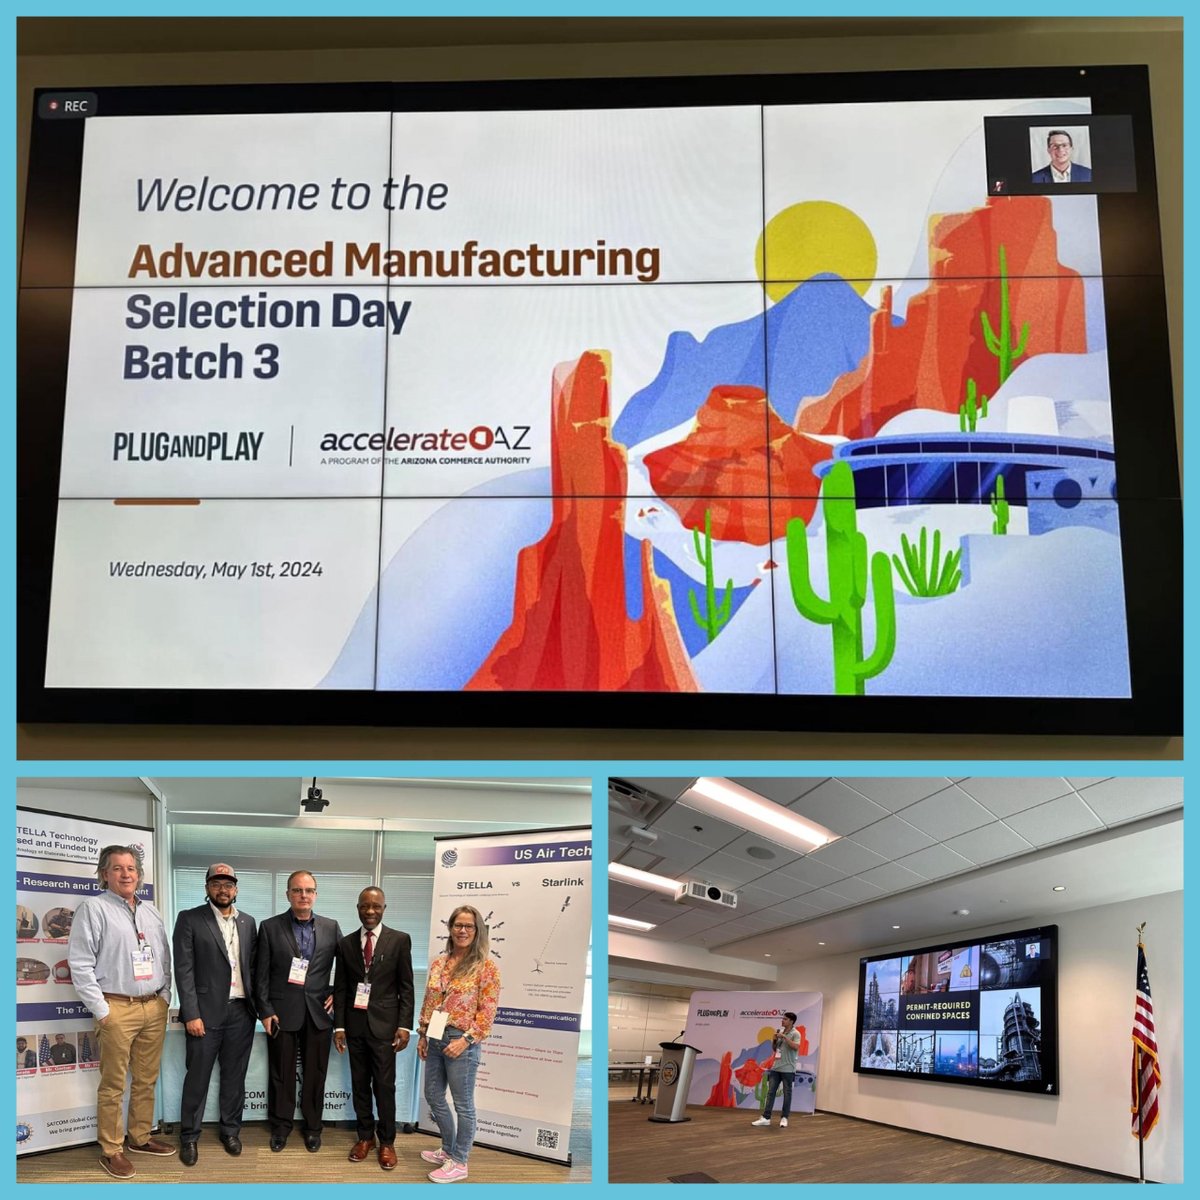 We loved attending Plug and Play's Accelerate AZ Selection Day for Advanced Manufacturing Batch 3! It brought together innovative startups, industry experts, and investors. Exceptional event featuring groundbreaking companies. #PlugAndPlay #AccelerateAZ #AdvancedManufacturing 🚀